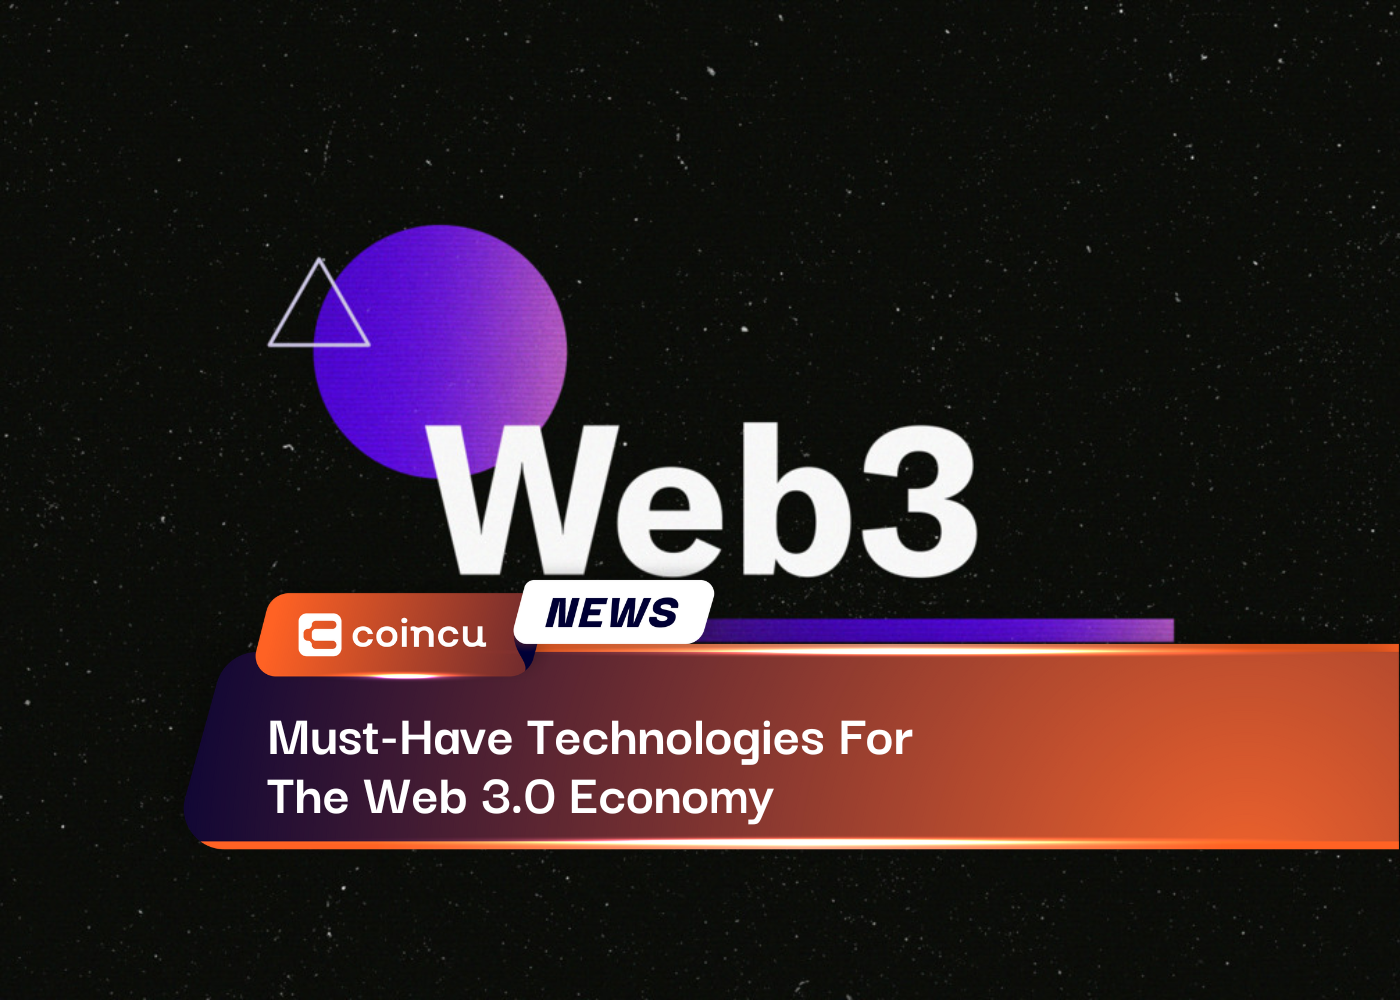 Must-Have Technologies For The Web 3.0 Economy